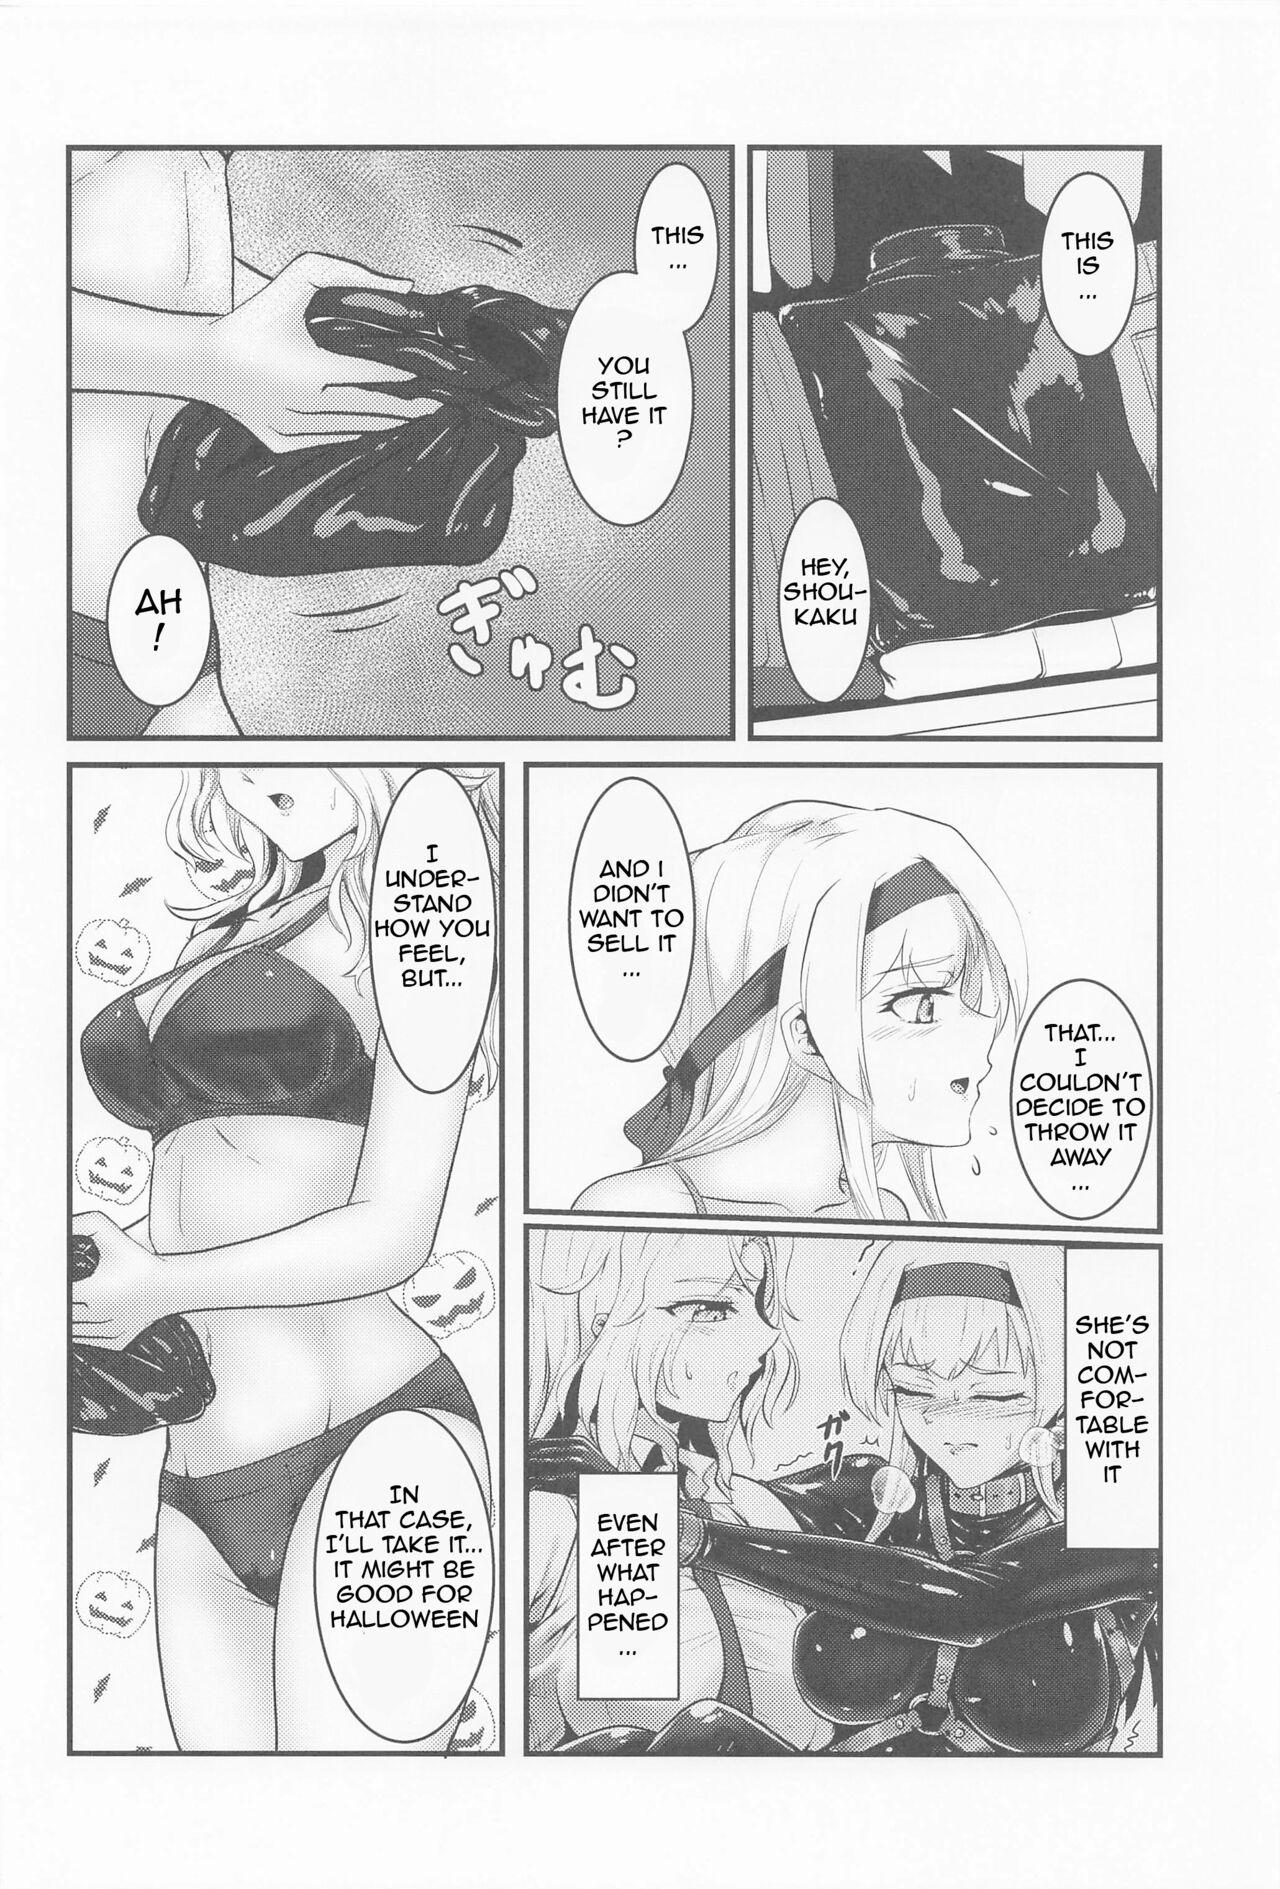 European Porn Covered by Honey... - Kantai collection Backshots - Page 5